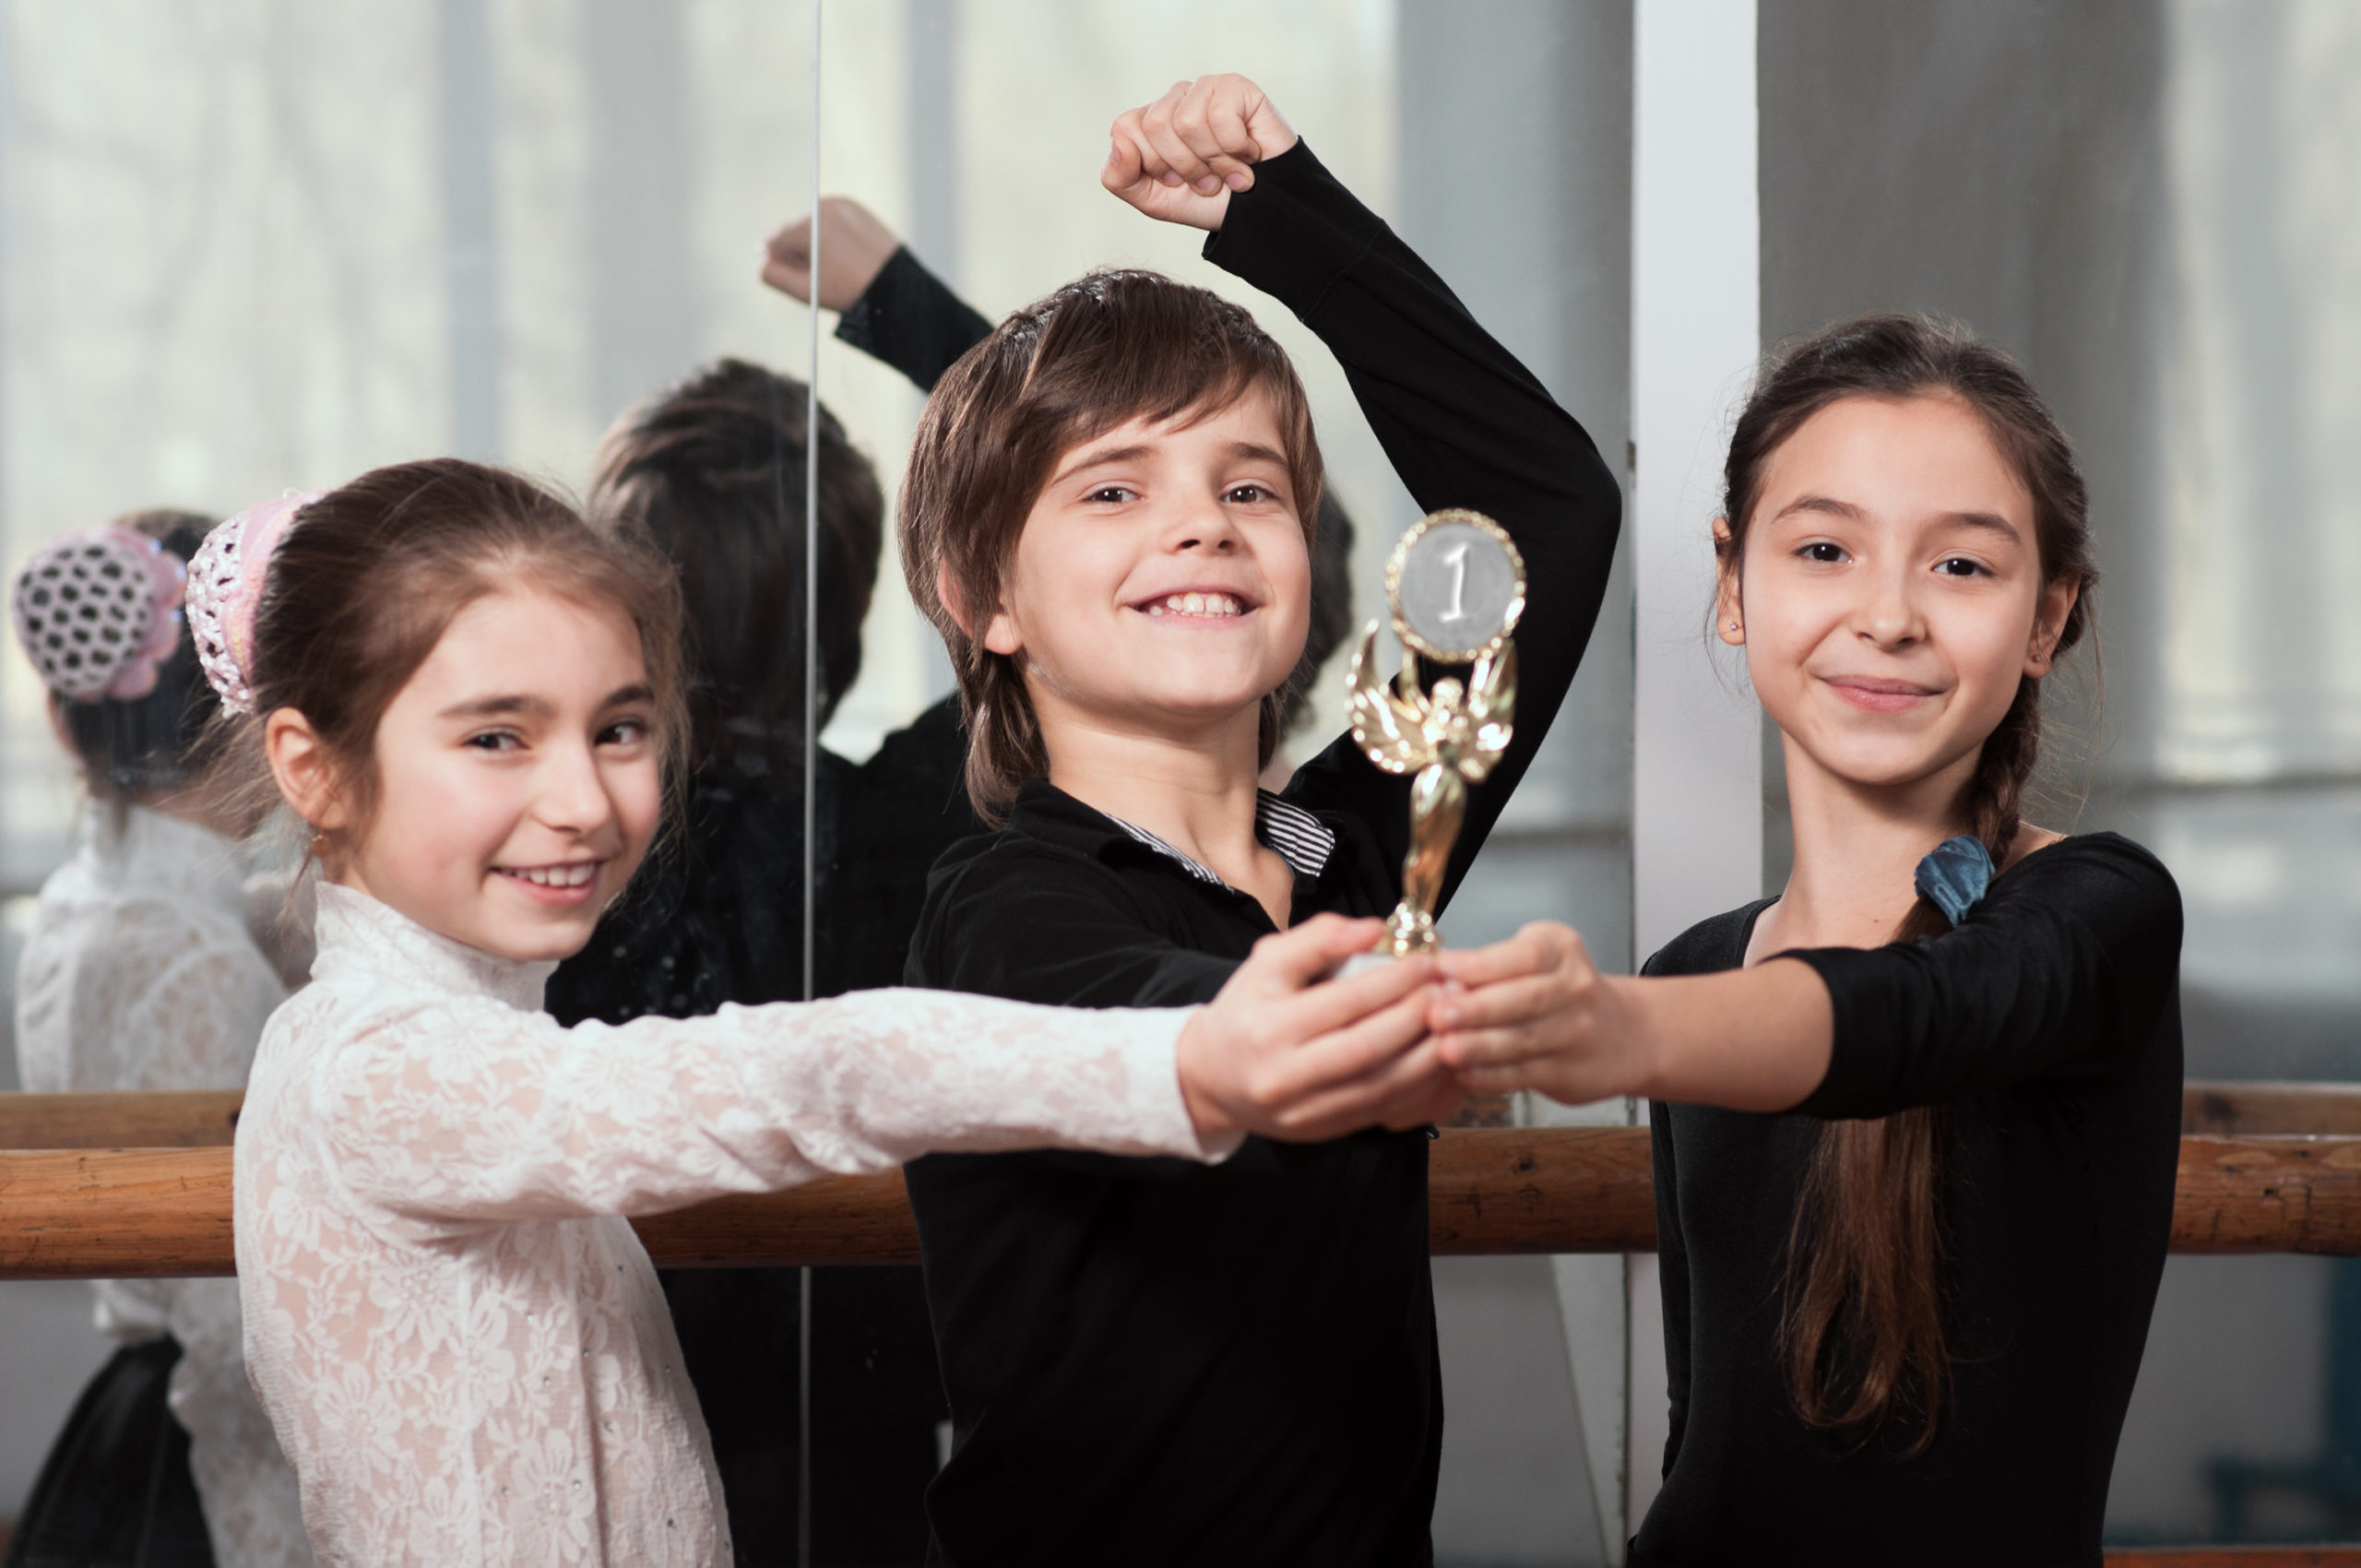 Three young dancers holding a trophy